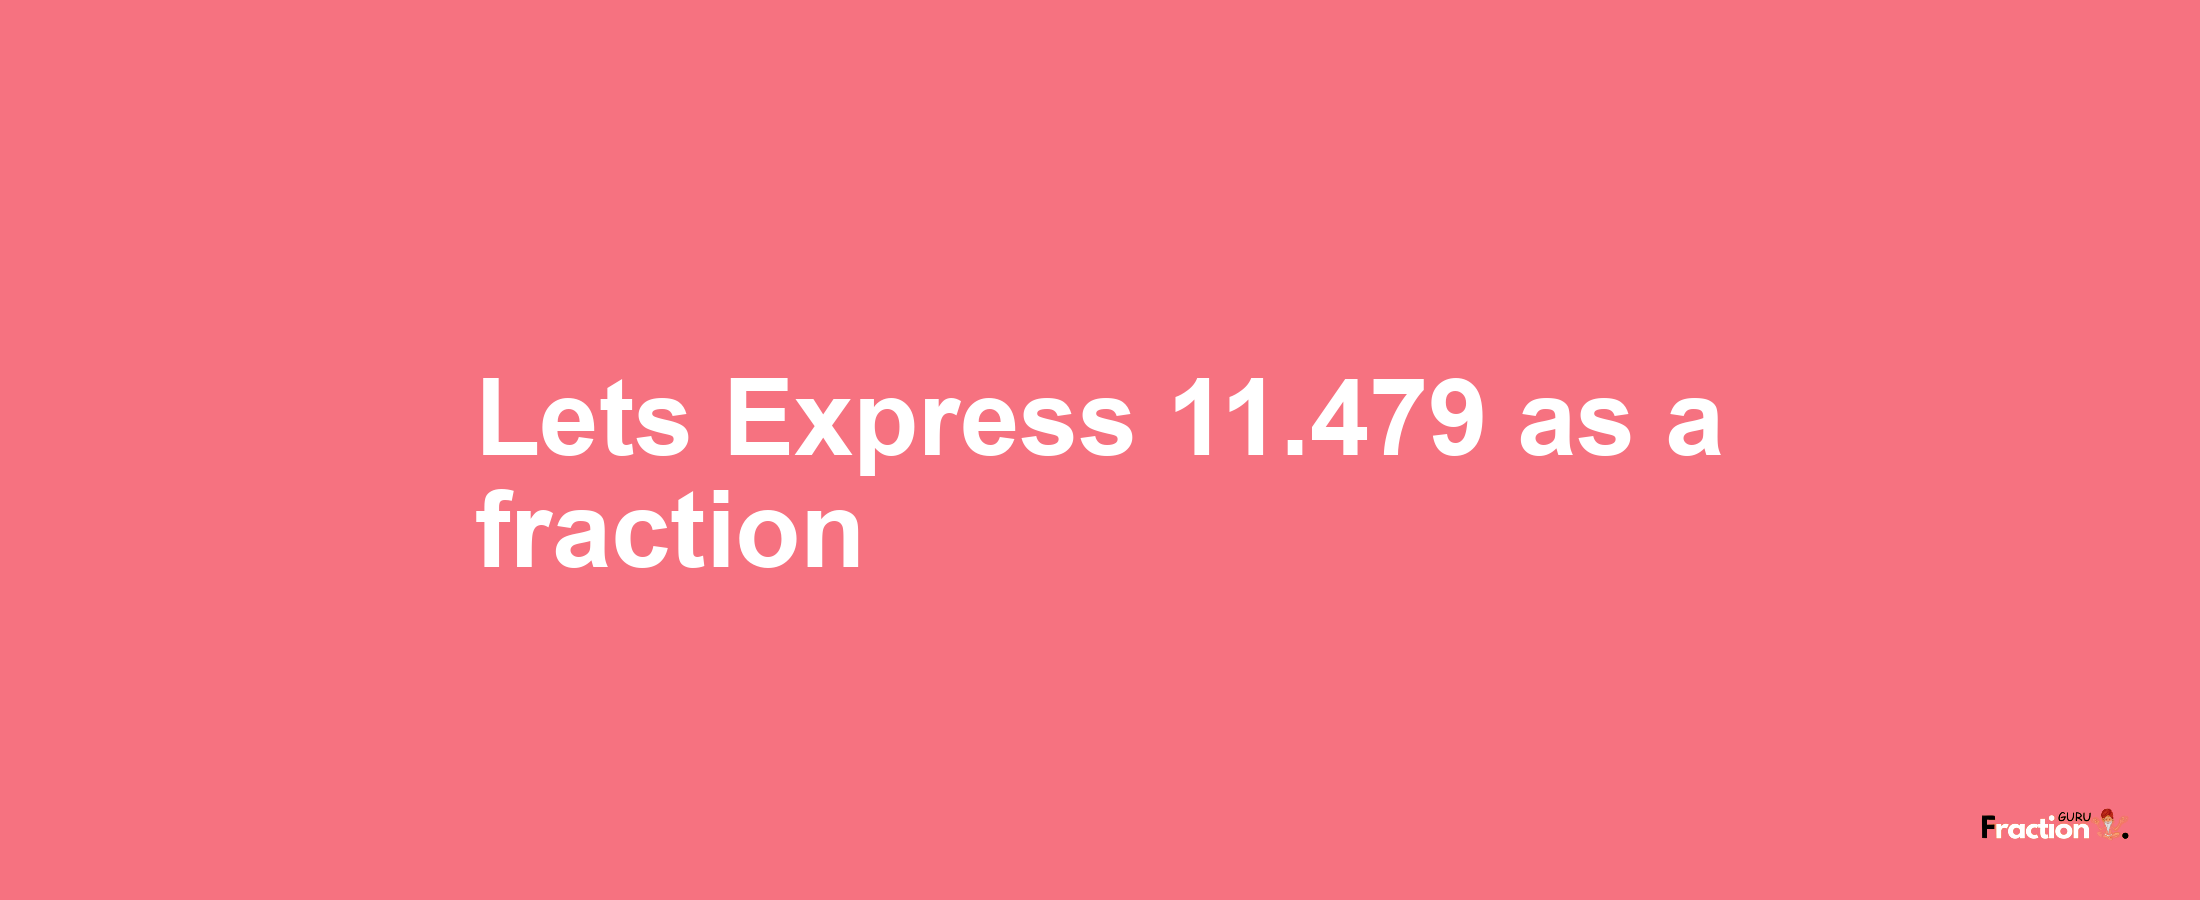 Lets Express 11.479 as afraction